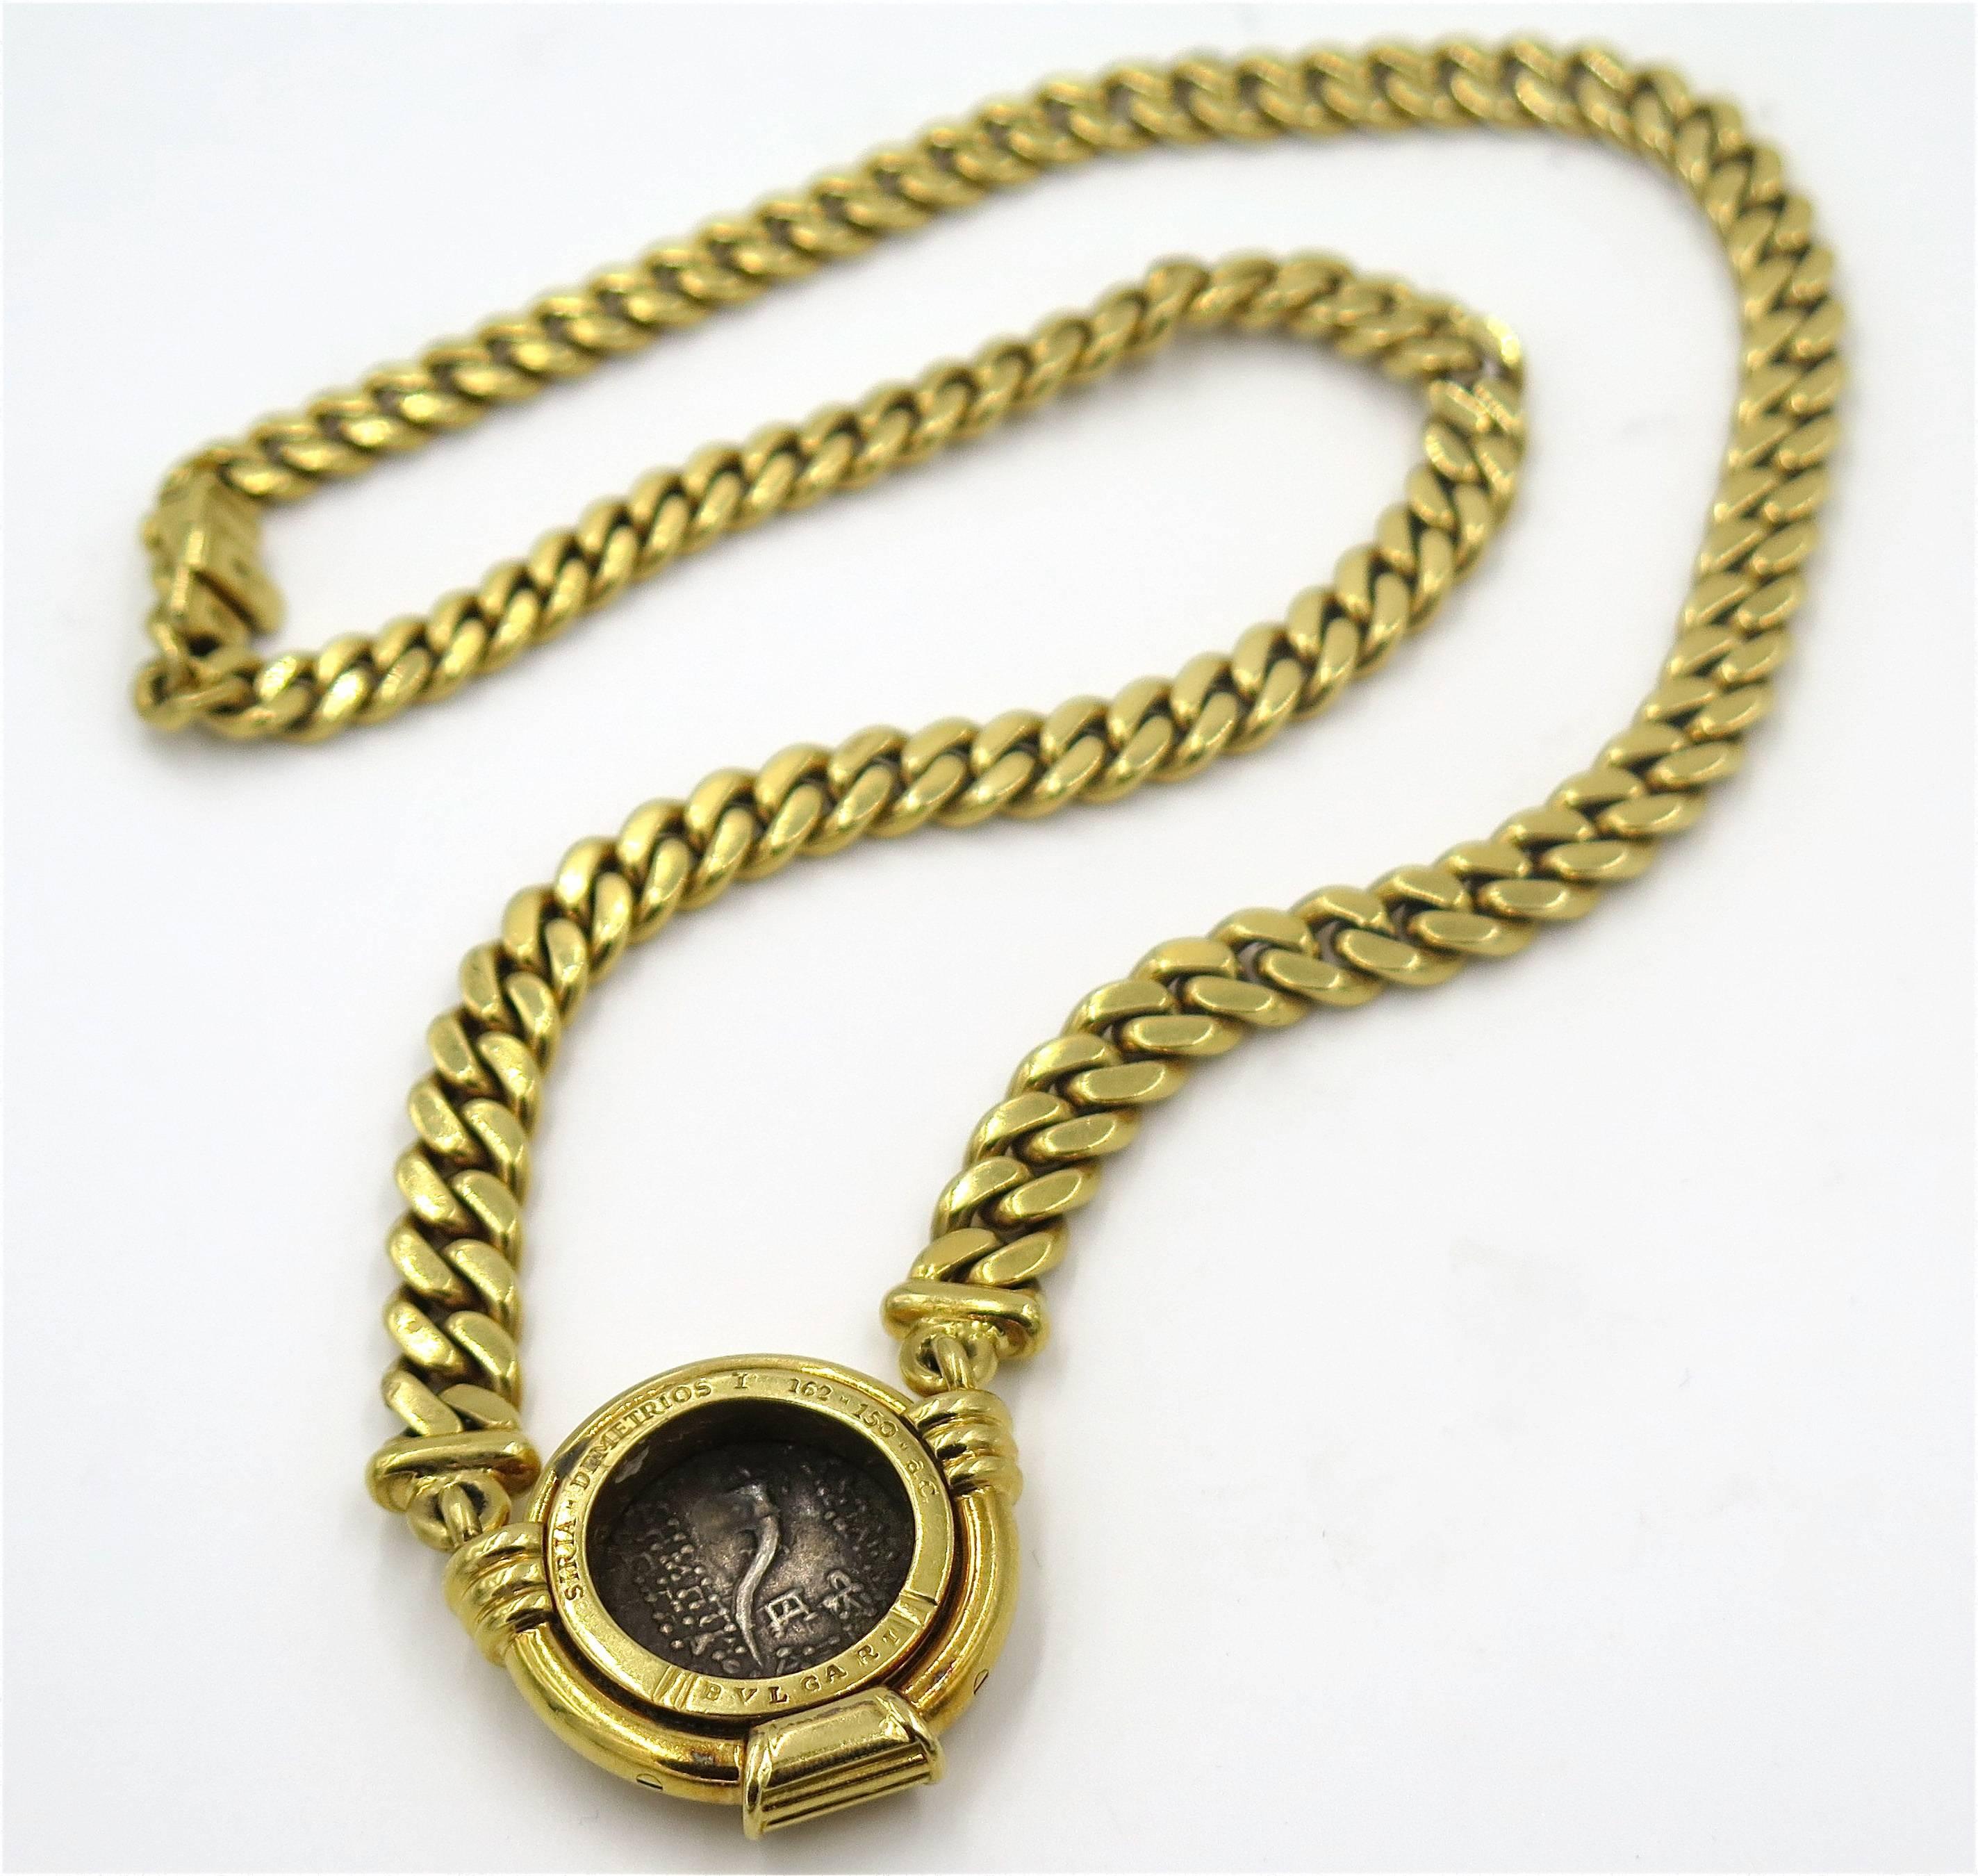 An 18 karat yellow gold and “Siria-Demitrios I 162-150 C.E.” ancient coin necklace, Bulgari.  The coin is bezel set in a yellow gold frame with fluted accents and is suspended from a graduated curb link chain.  The necklace has a gross weight of